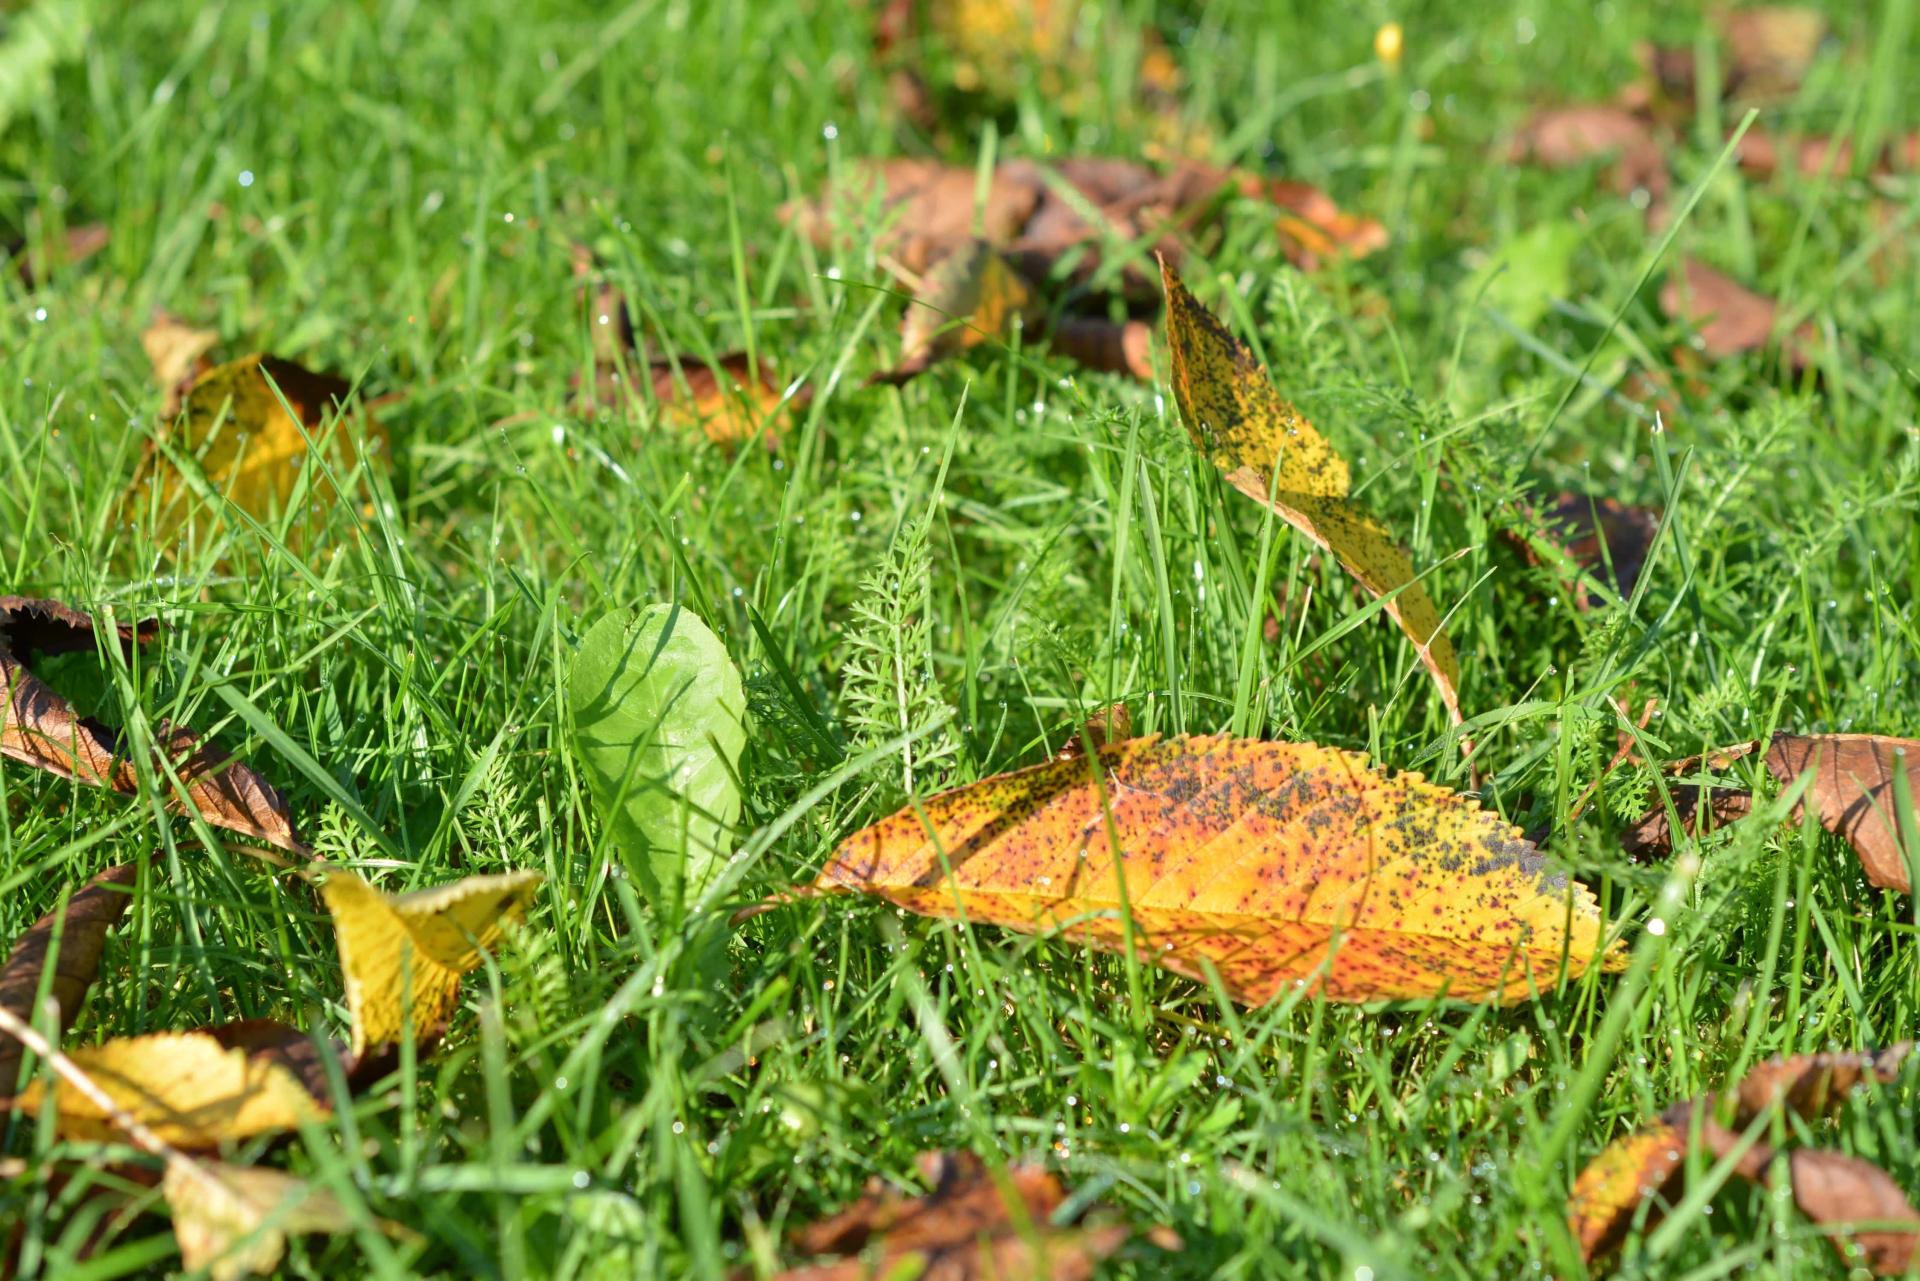 Leaves in the Grass